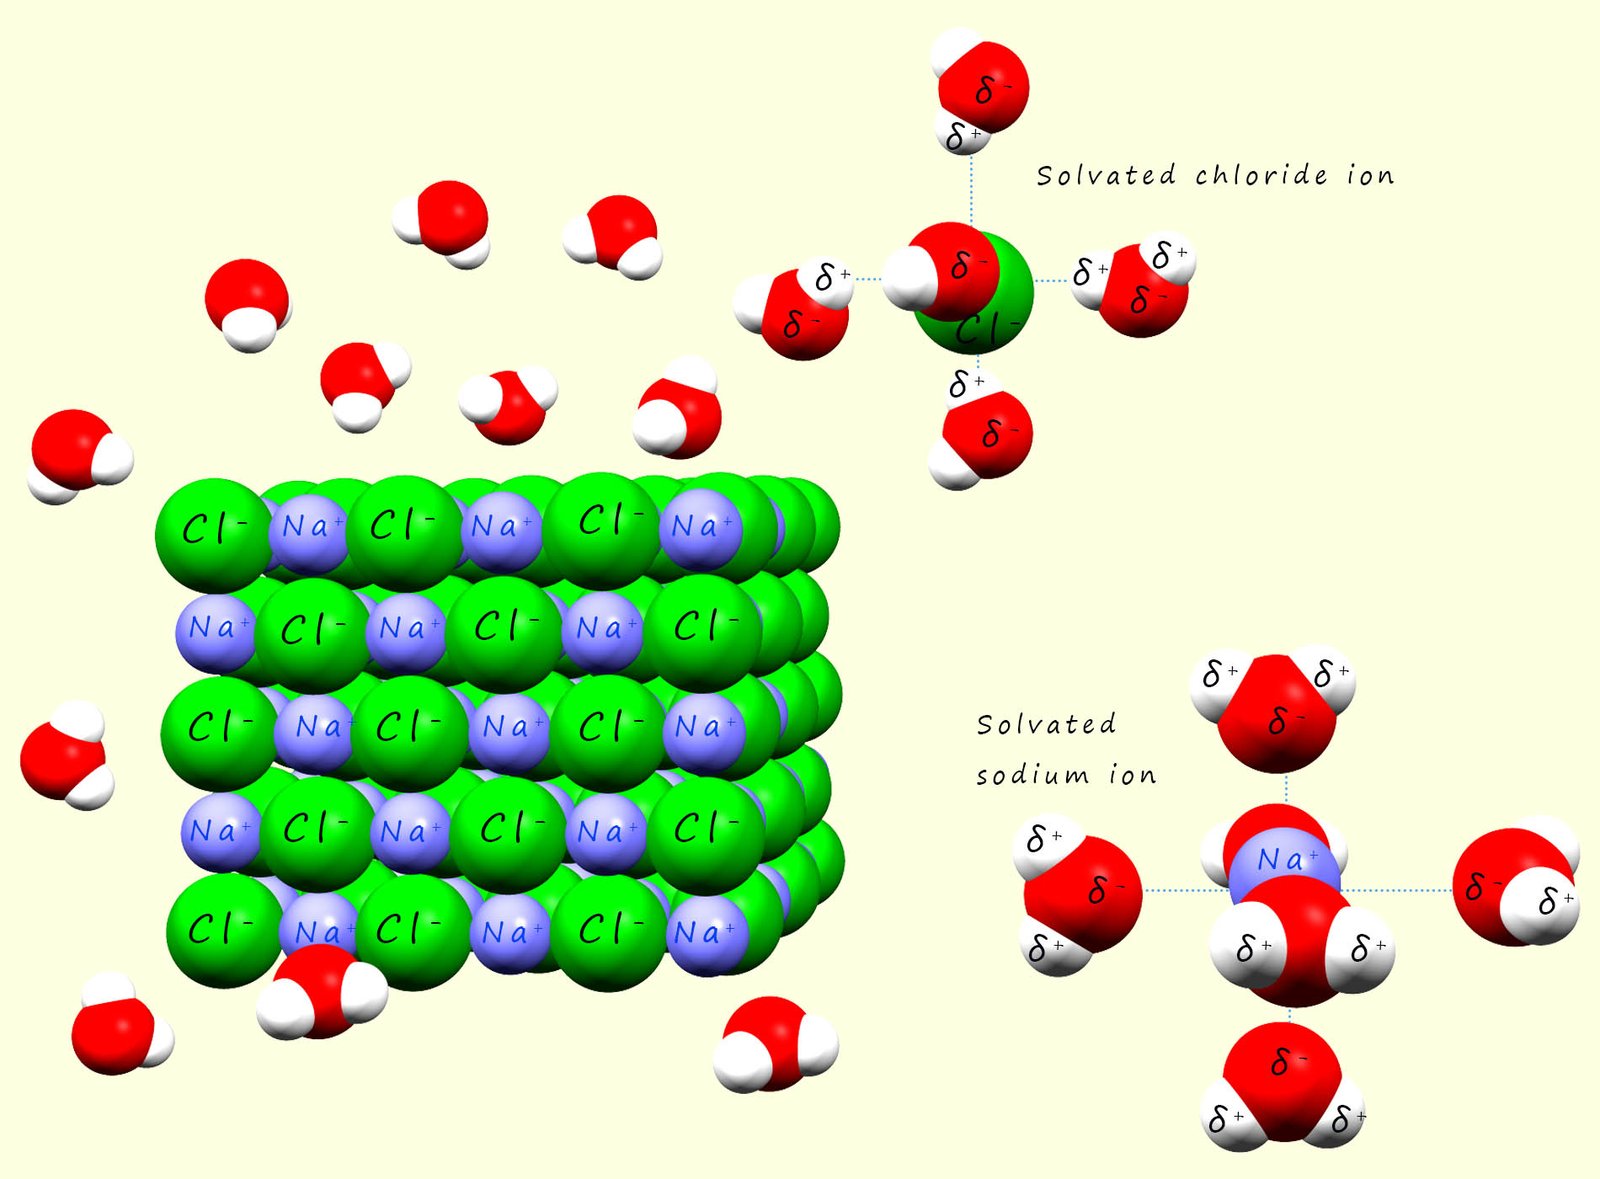 Water molecules solvating a sodium chloride lattice.  The water molecules surround the sodium chloride lattice and pull the ions from the lattice, the ions are said to be solvated.